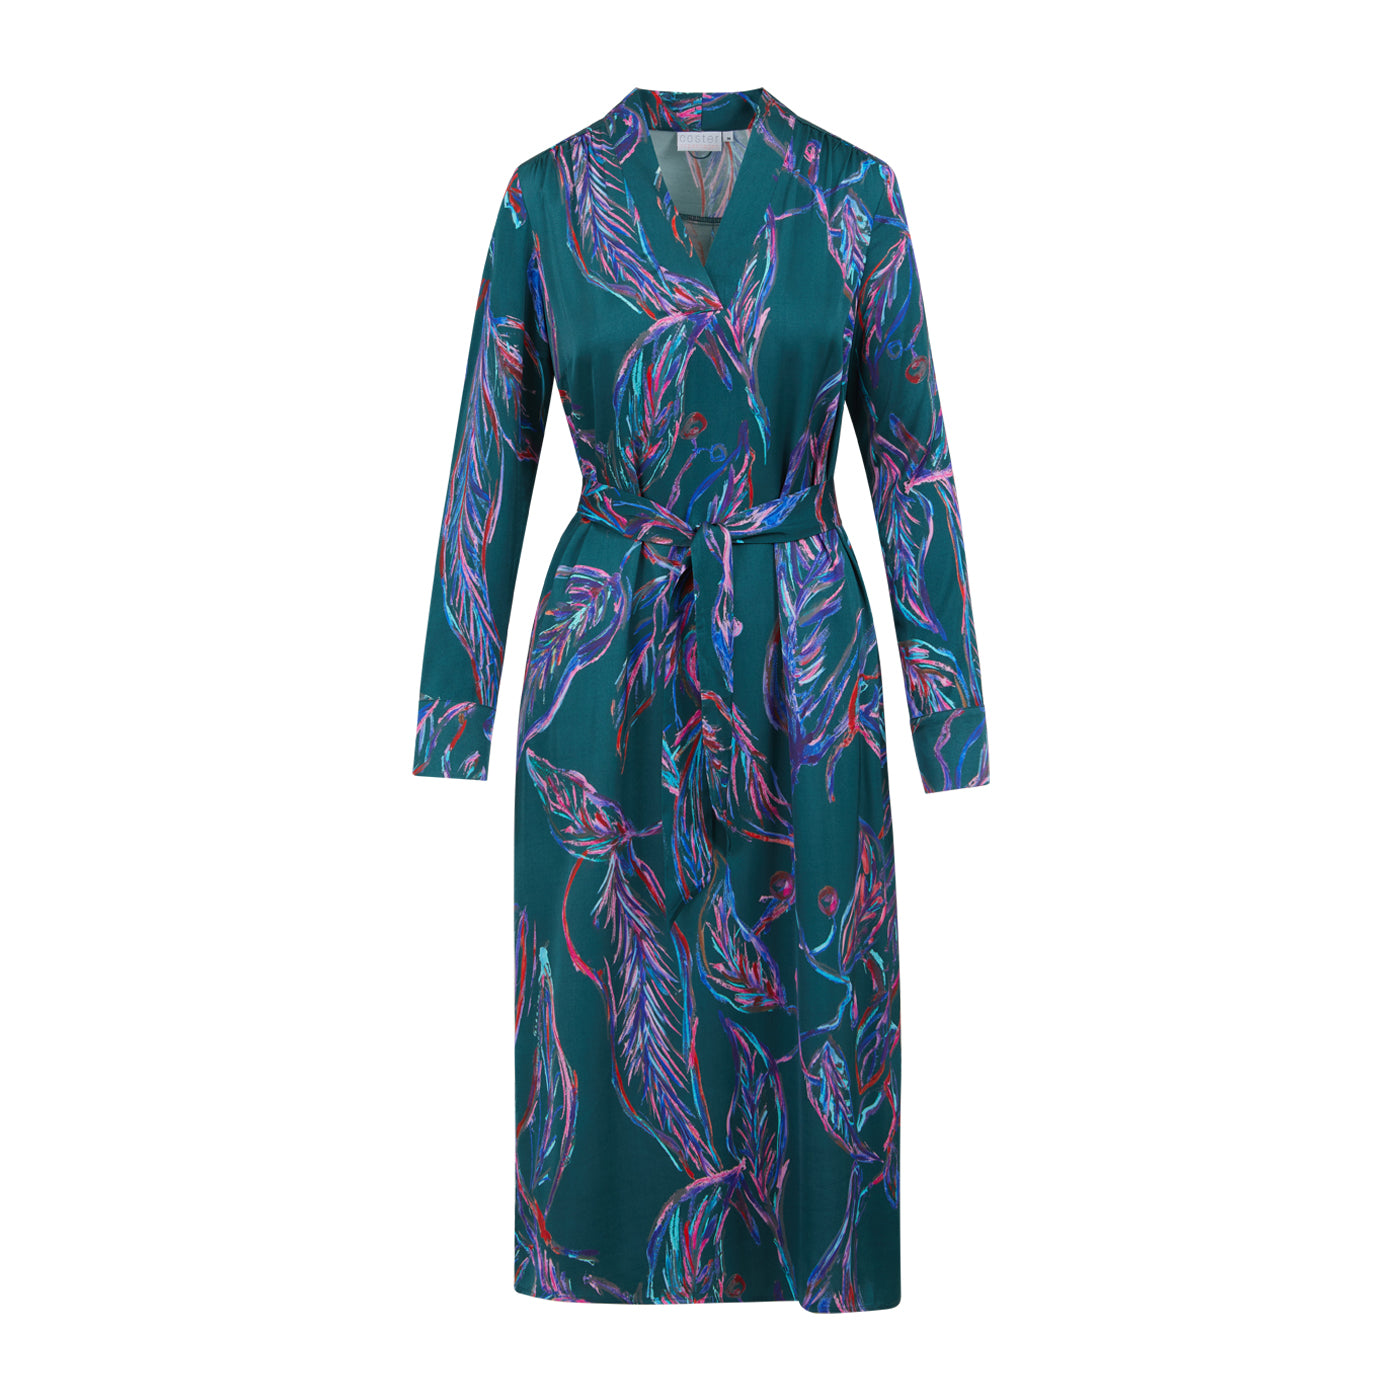 This stunning dress by&nbsp;Coster Copenhagen&nbsp;will be a super useful piece going from Summer to Autumn. It's luxurious feeling fabric is absolutely stunning. The print is in the most amazing shades of green and a pop of pink and red. The V neck is perfect for the fuller bust. It has longer sleeve with a deep cuff and a single button fastener. There is a simple tie belt but this piece can be worn loose without it. There are side pockets and small side splits. 